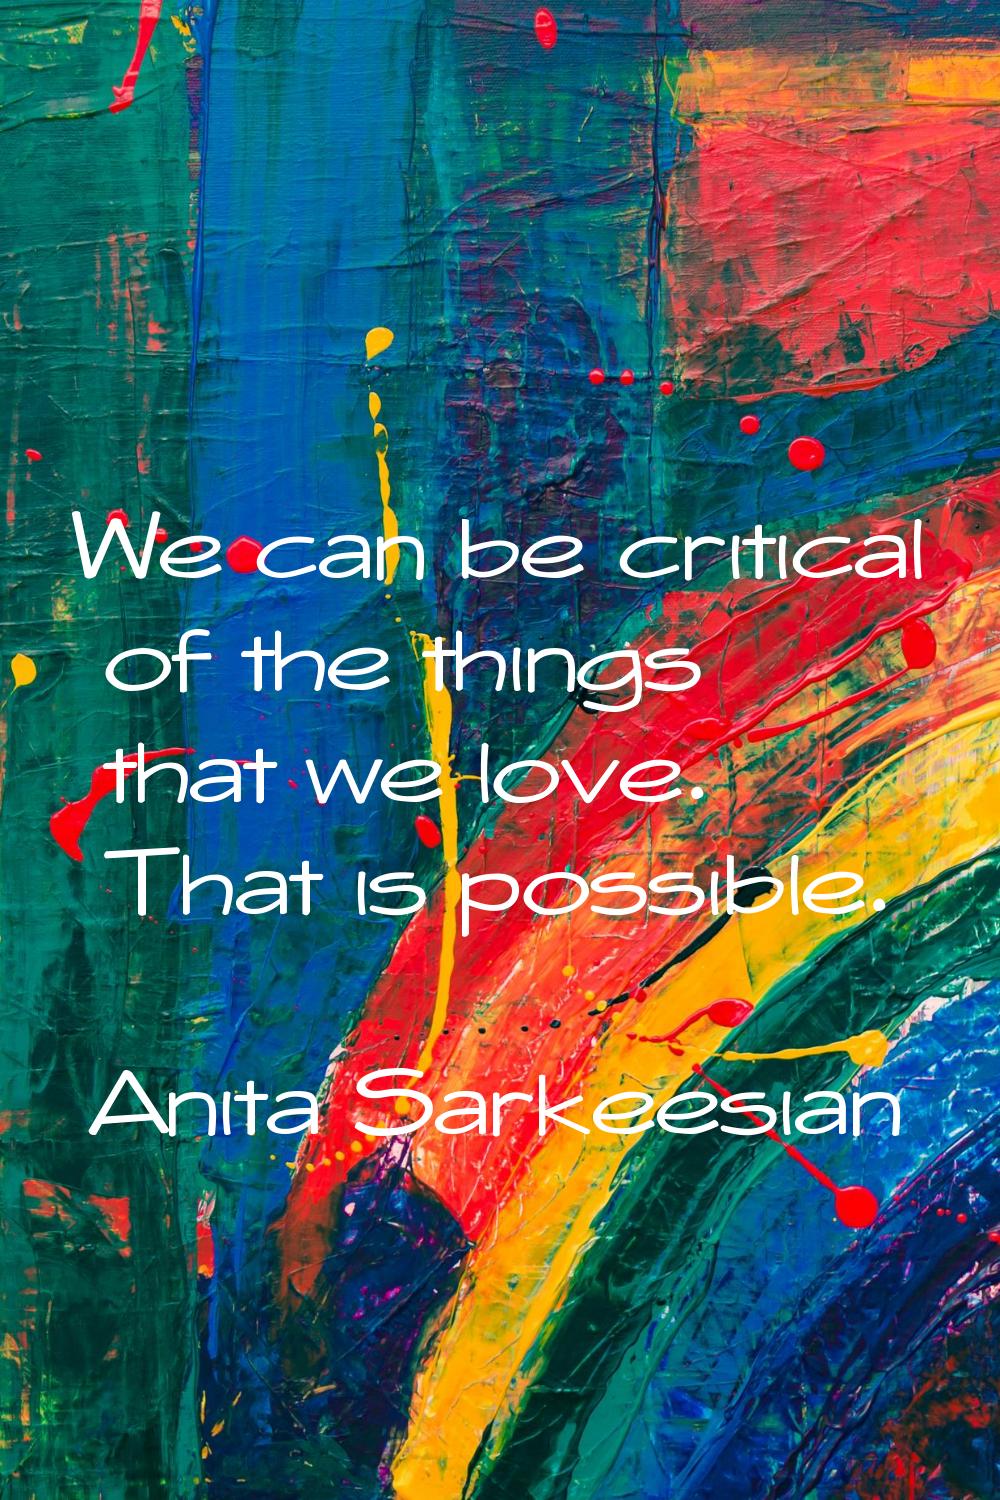 We can be critical of the things that we love. That is possible.